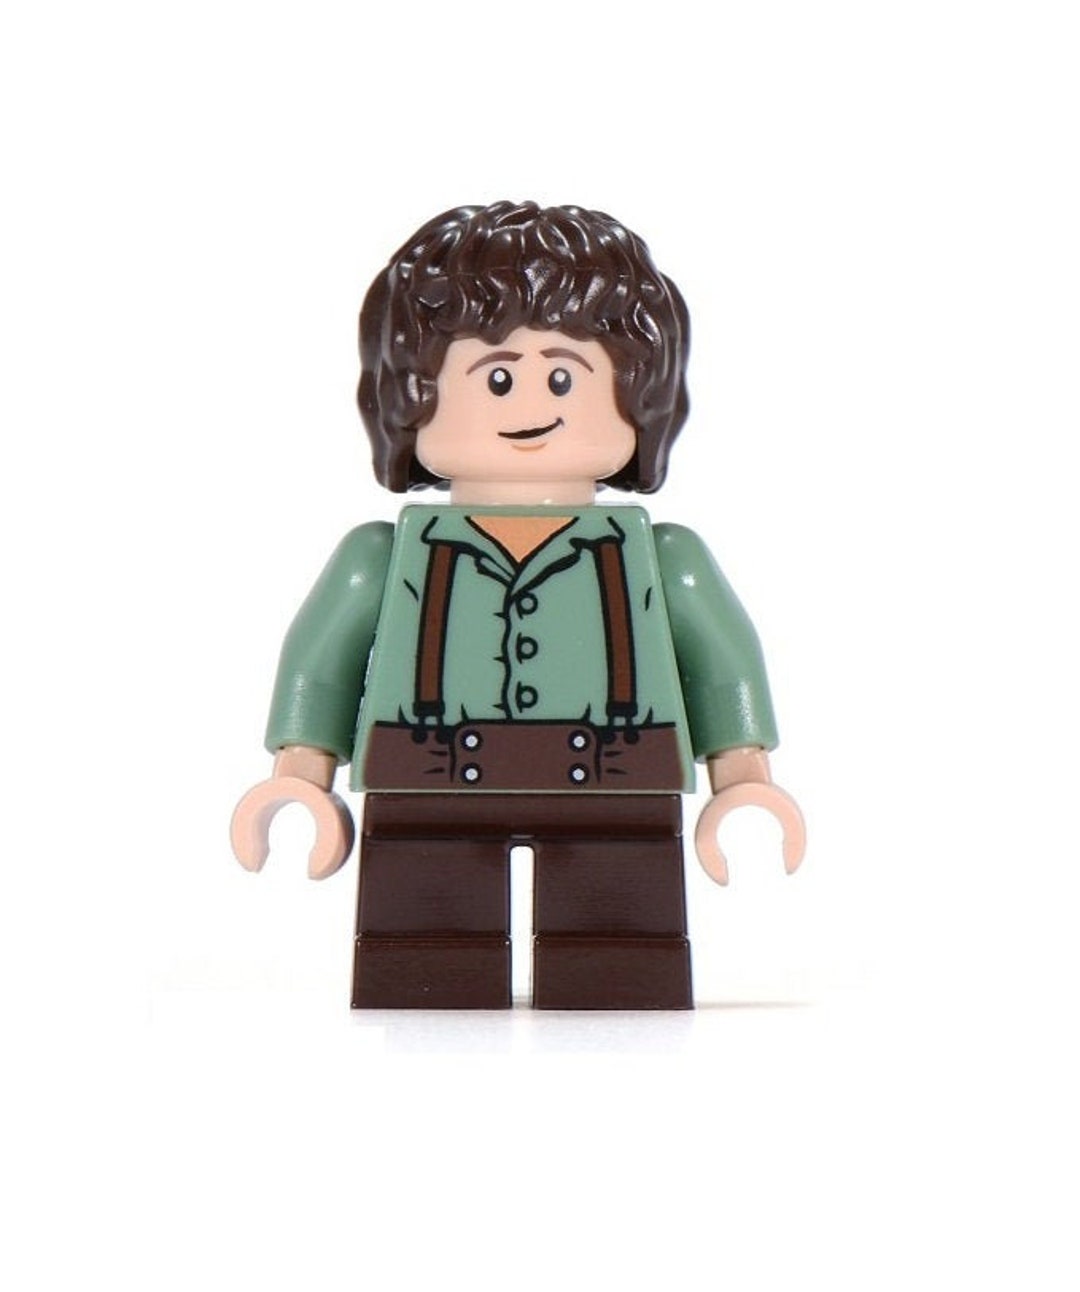 Lego MINIFIGURE Hobbit Lord of the Rings Frodo Baggins Sand Green